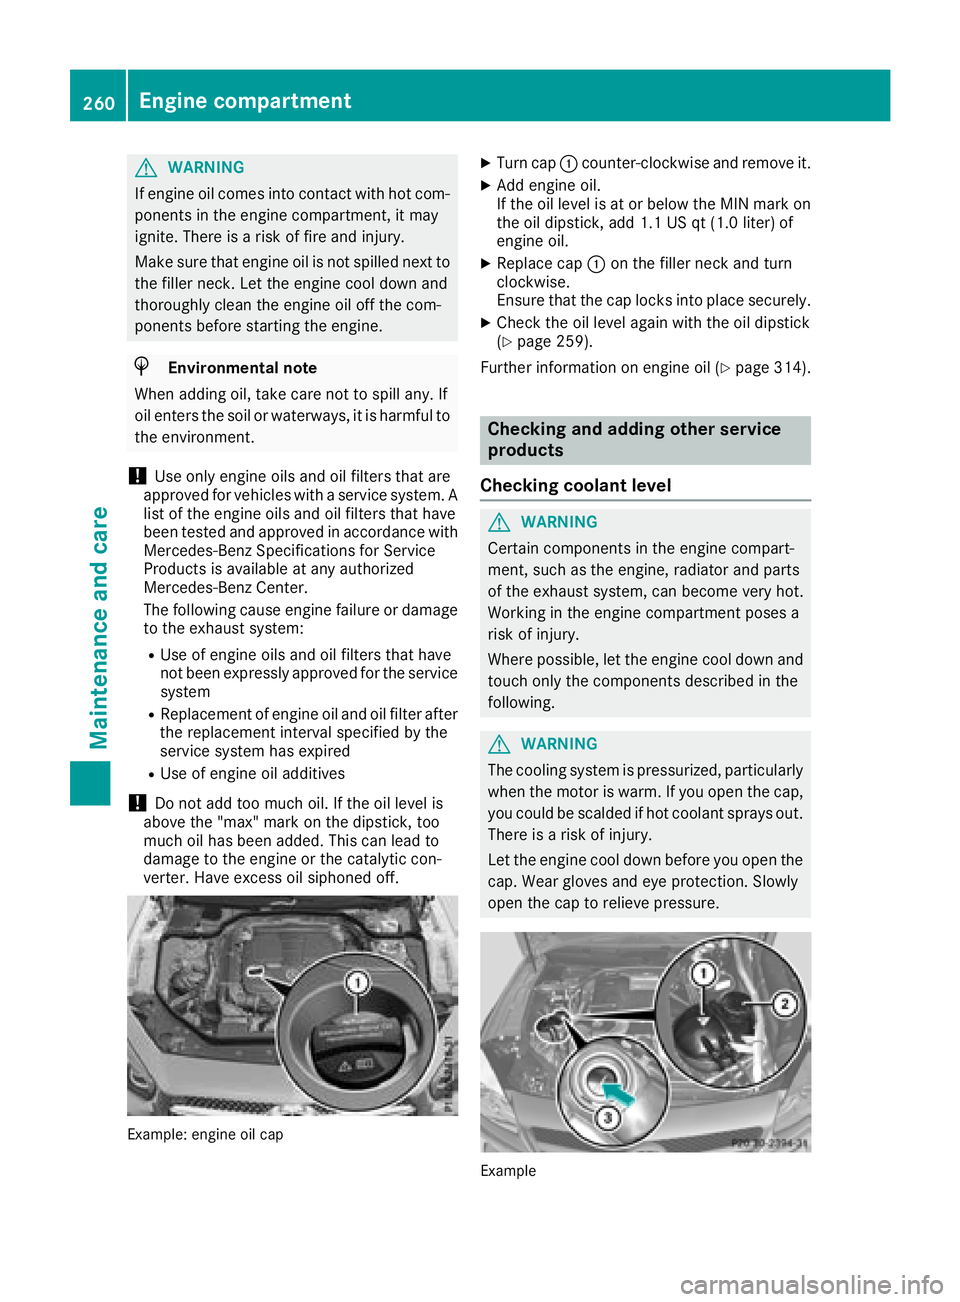 MERCEDES-BENZ SL ROADSTER 2018  Owners Manual GWARNING
If engine oil comes into contact with hot com- ponents in the engine compartment, it may
ignite. There is a risk of fire and injury.
Make sure that engine oil is not spilled next to
the fille